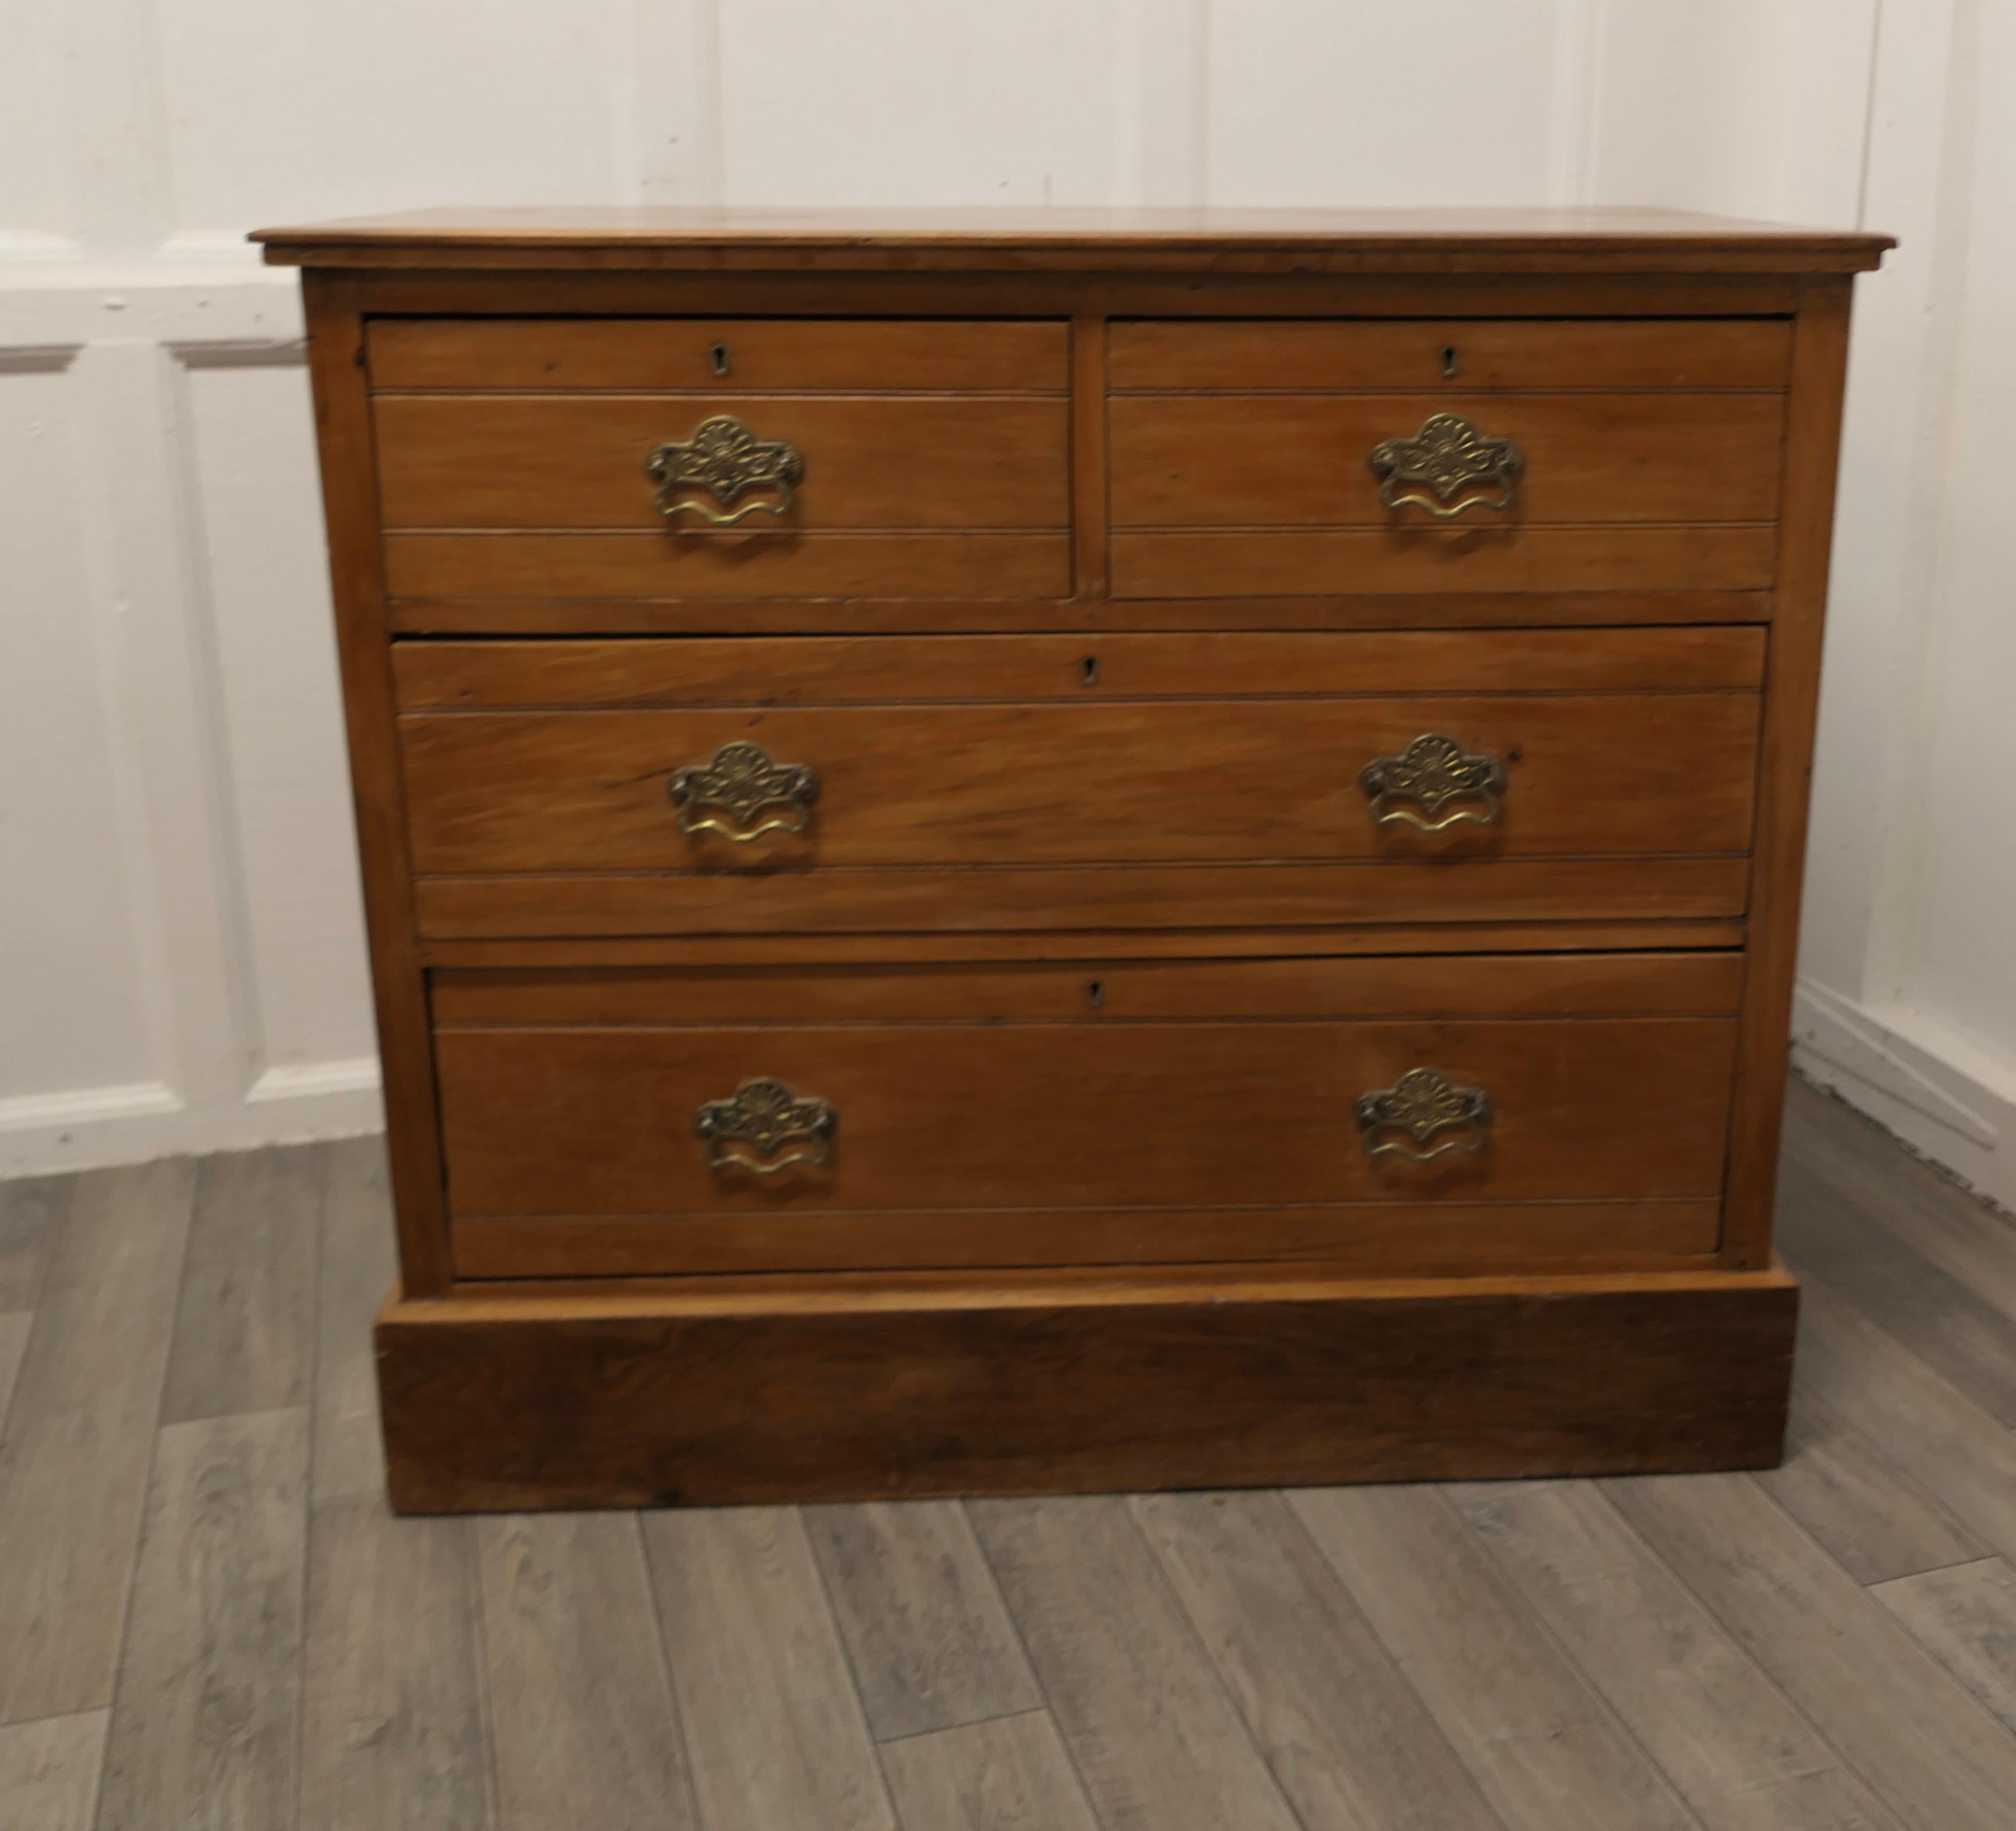 Arts and Crafts golden walnut chest of drawers

 This is a good solid chest, there are 2 short drawers over 2 graduated longdrawers with superb arts and crafts brass handles
The chest has a moulded edge to the top and a little carved decoration